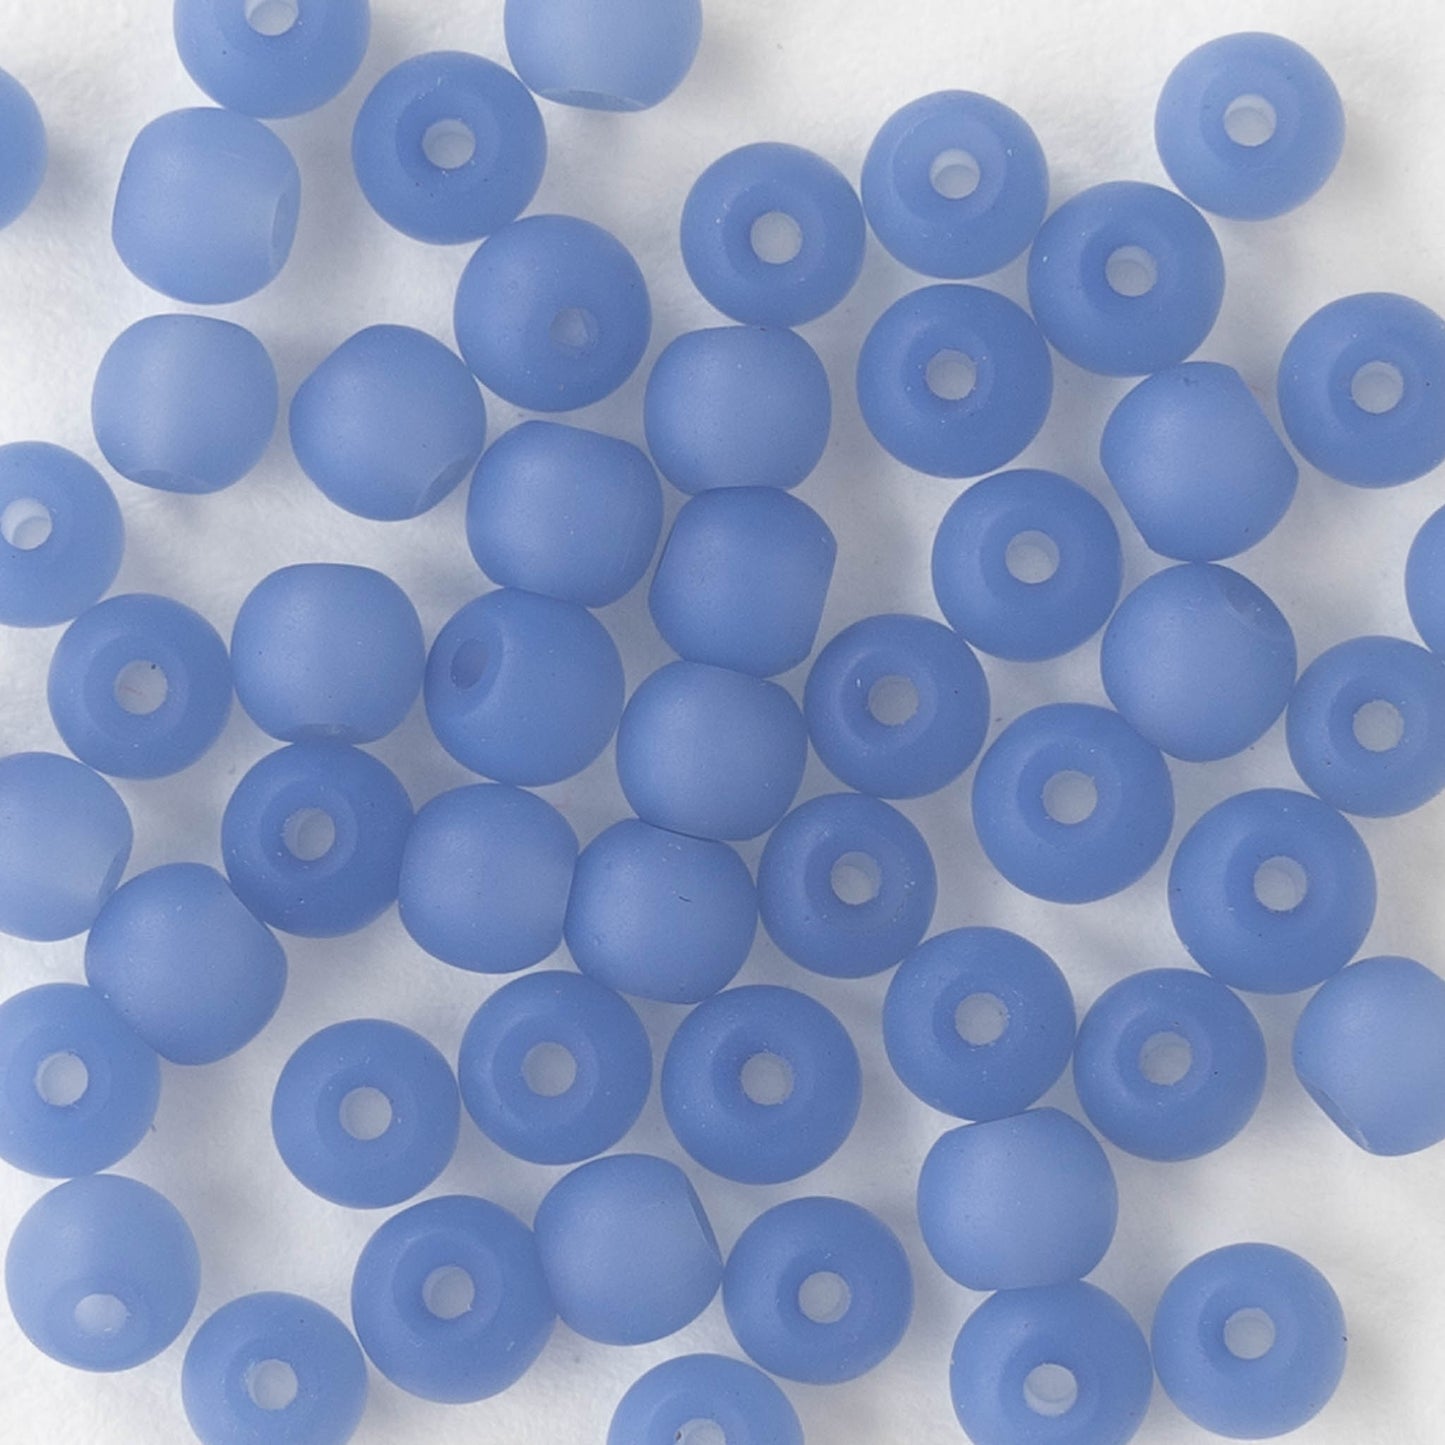 5mm Frosted Glass Rounds - Opaque Periwinkle Blue - 16 Inches